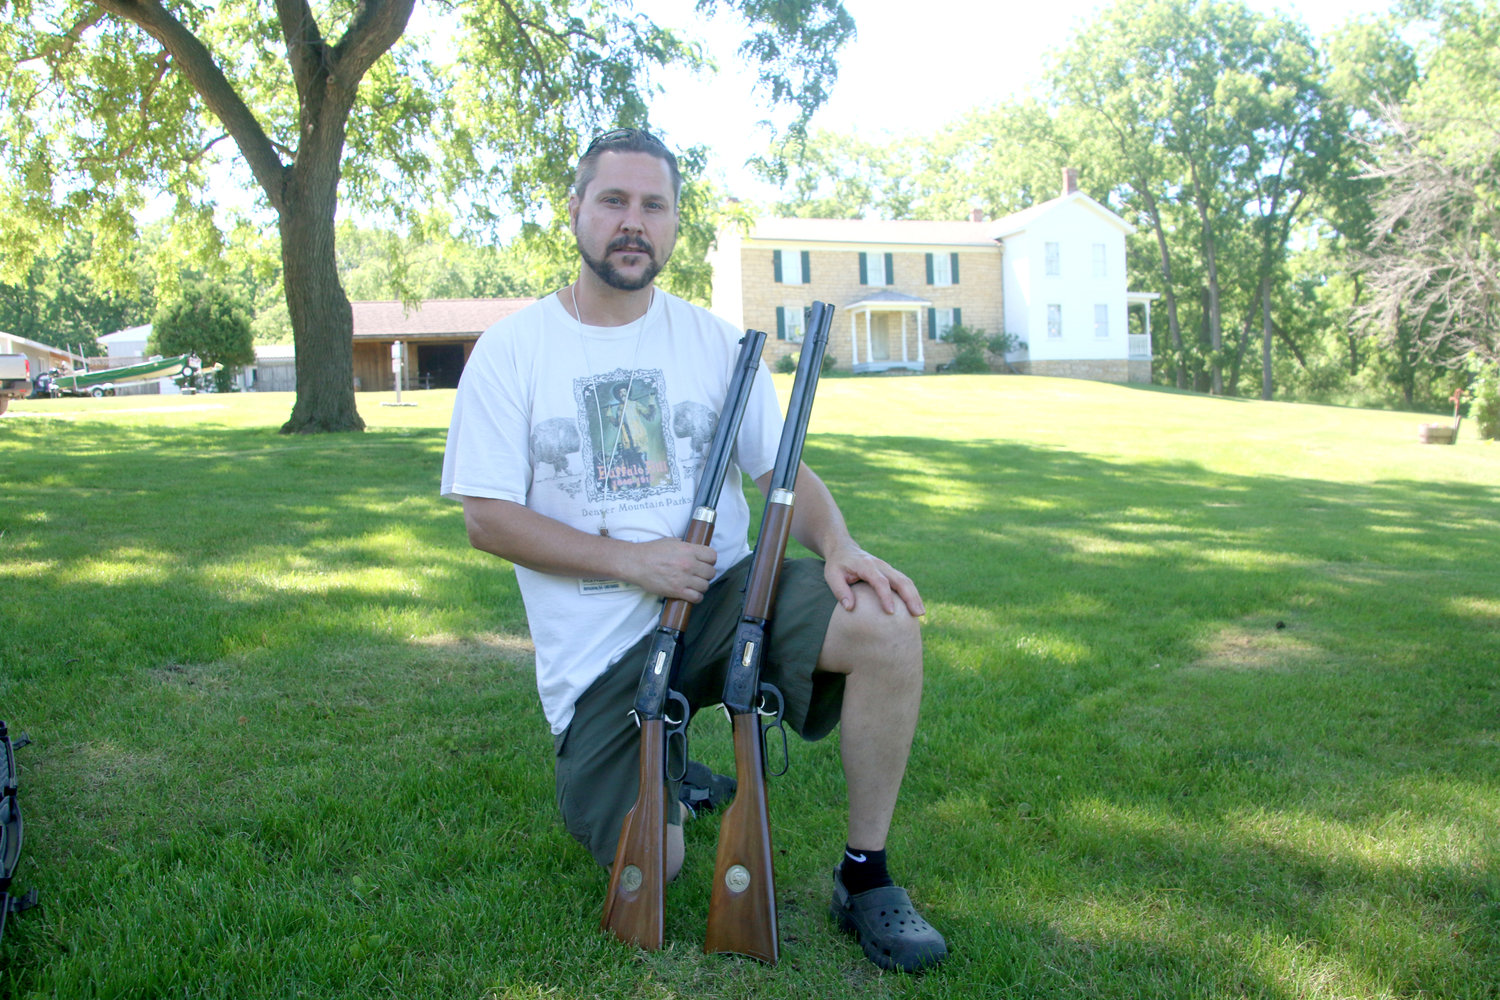 William “Kevin” Cody poses at the Cody Homestead with some Winchester Commemorative Buffalo Bill 30/30 Model 94 rifles after firing them earlier that morning at the Princeton shooting range.